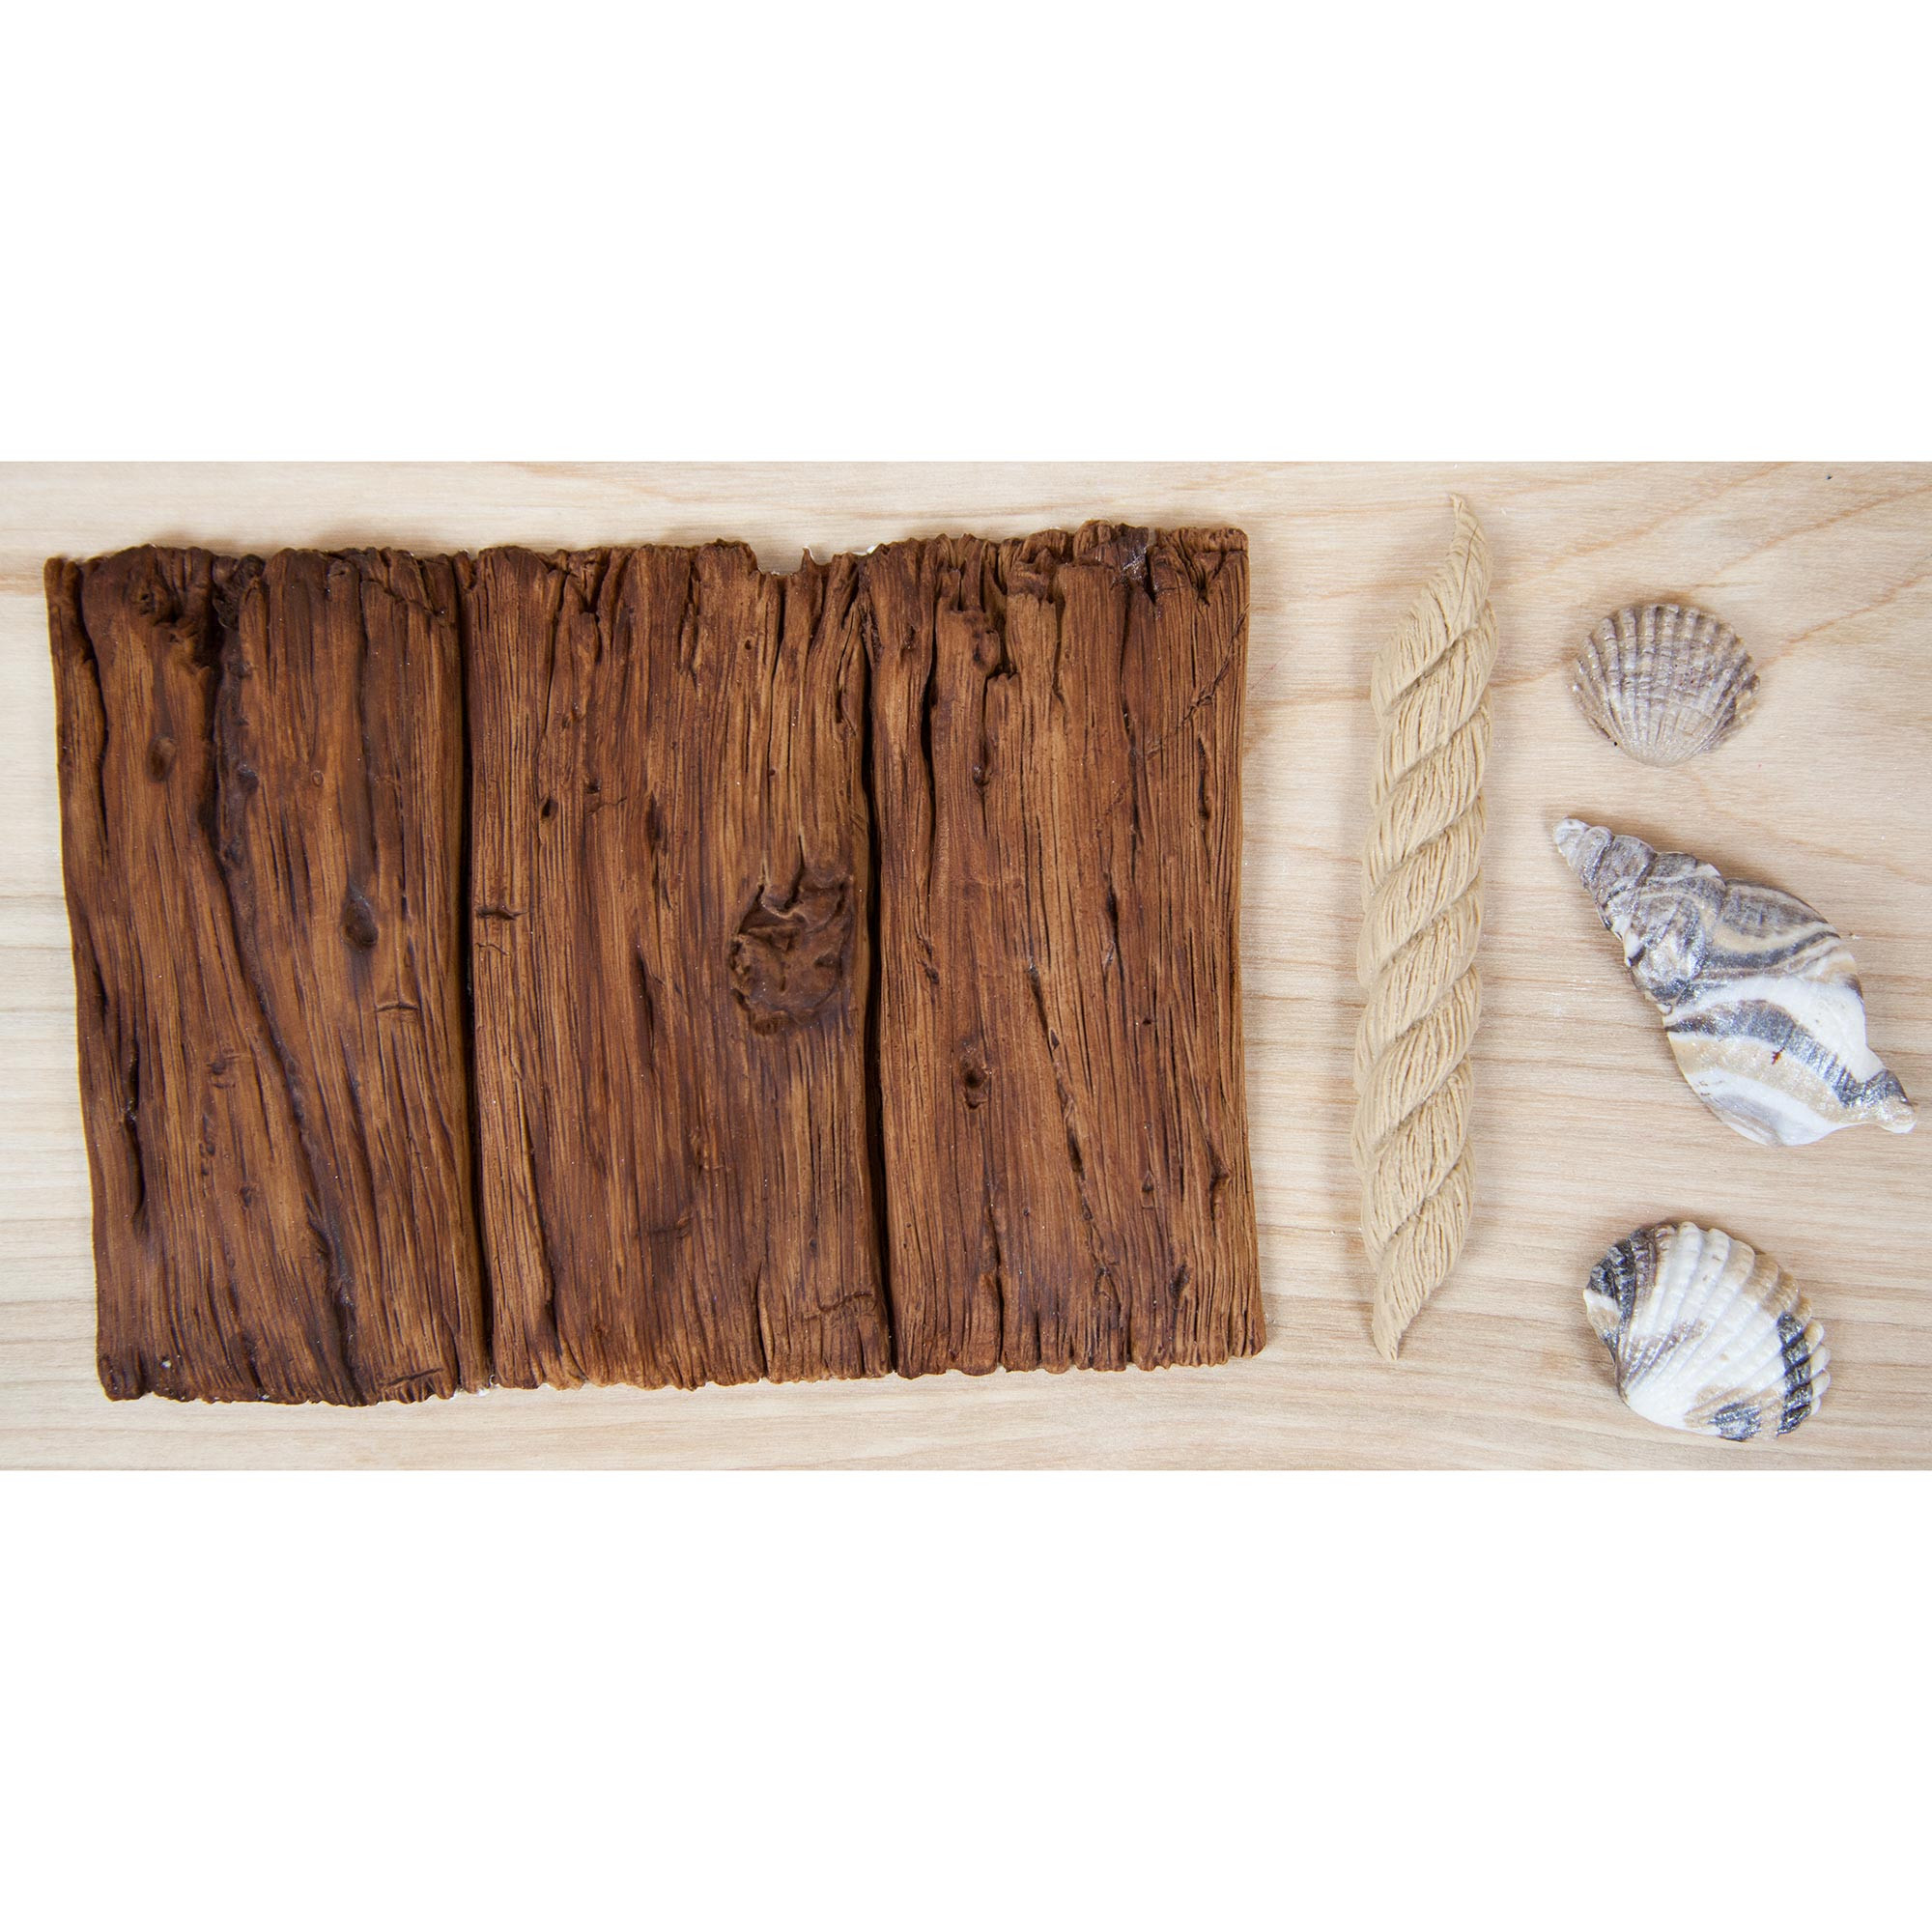 Alice's Rustic Driftwood Mold by Karen Davies Decorative Molds